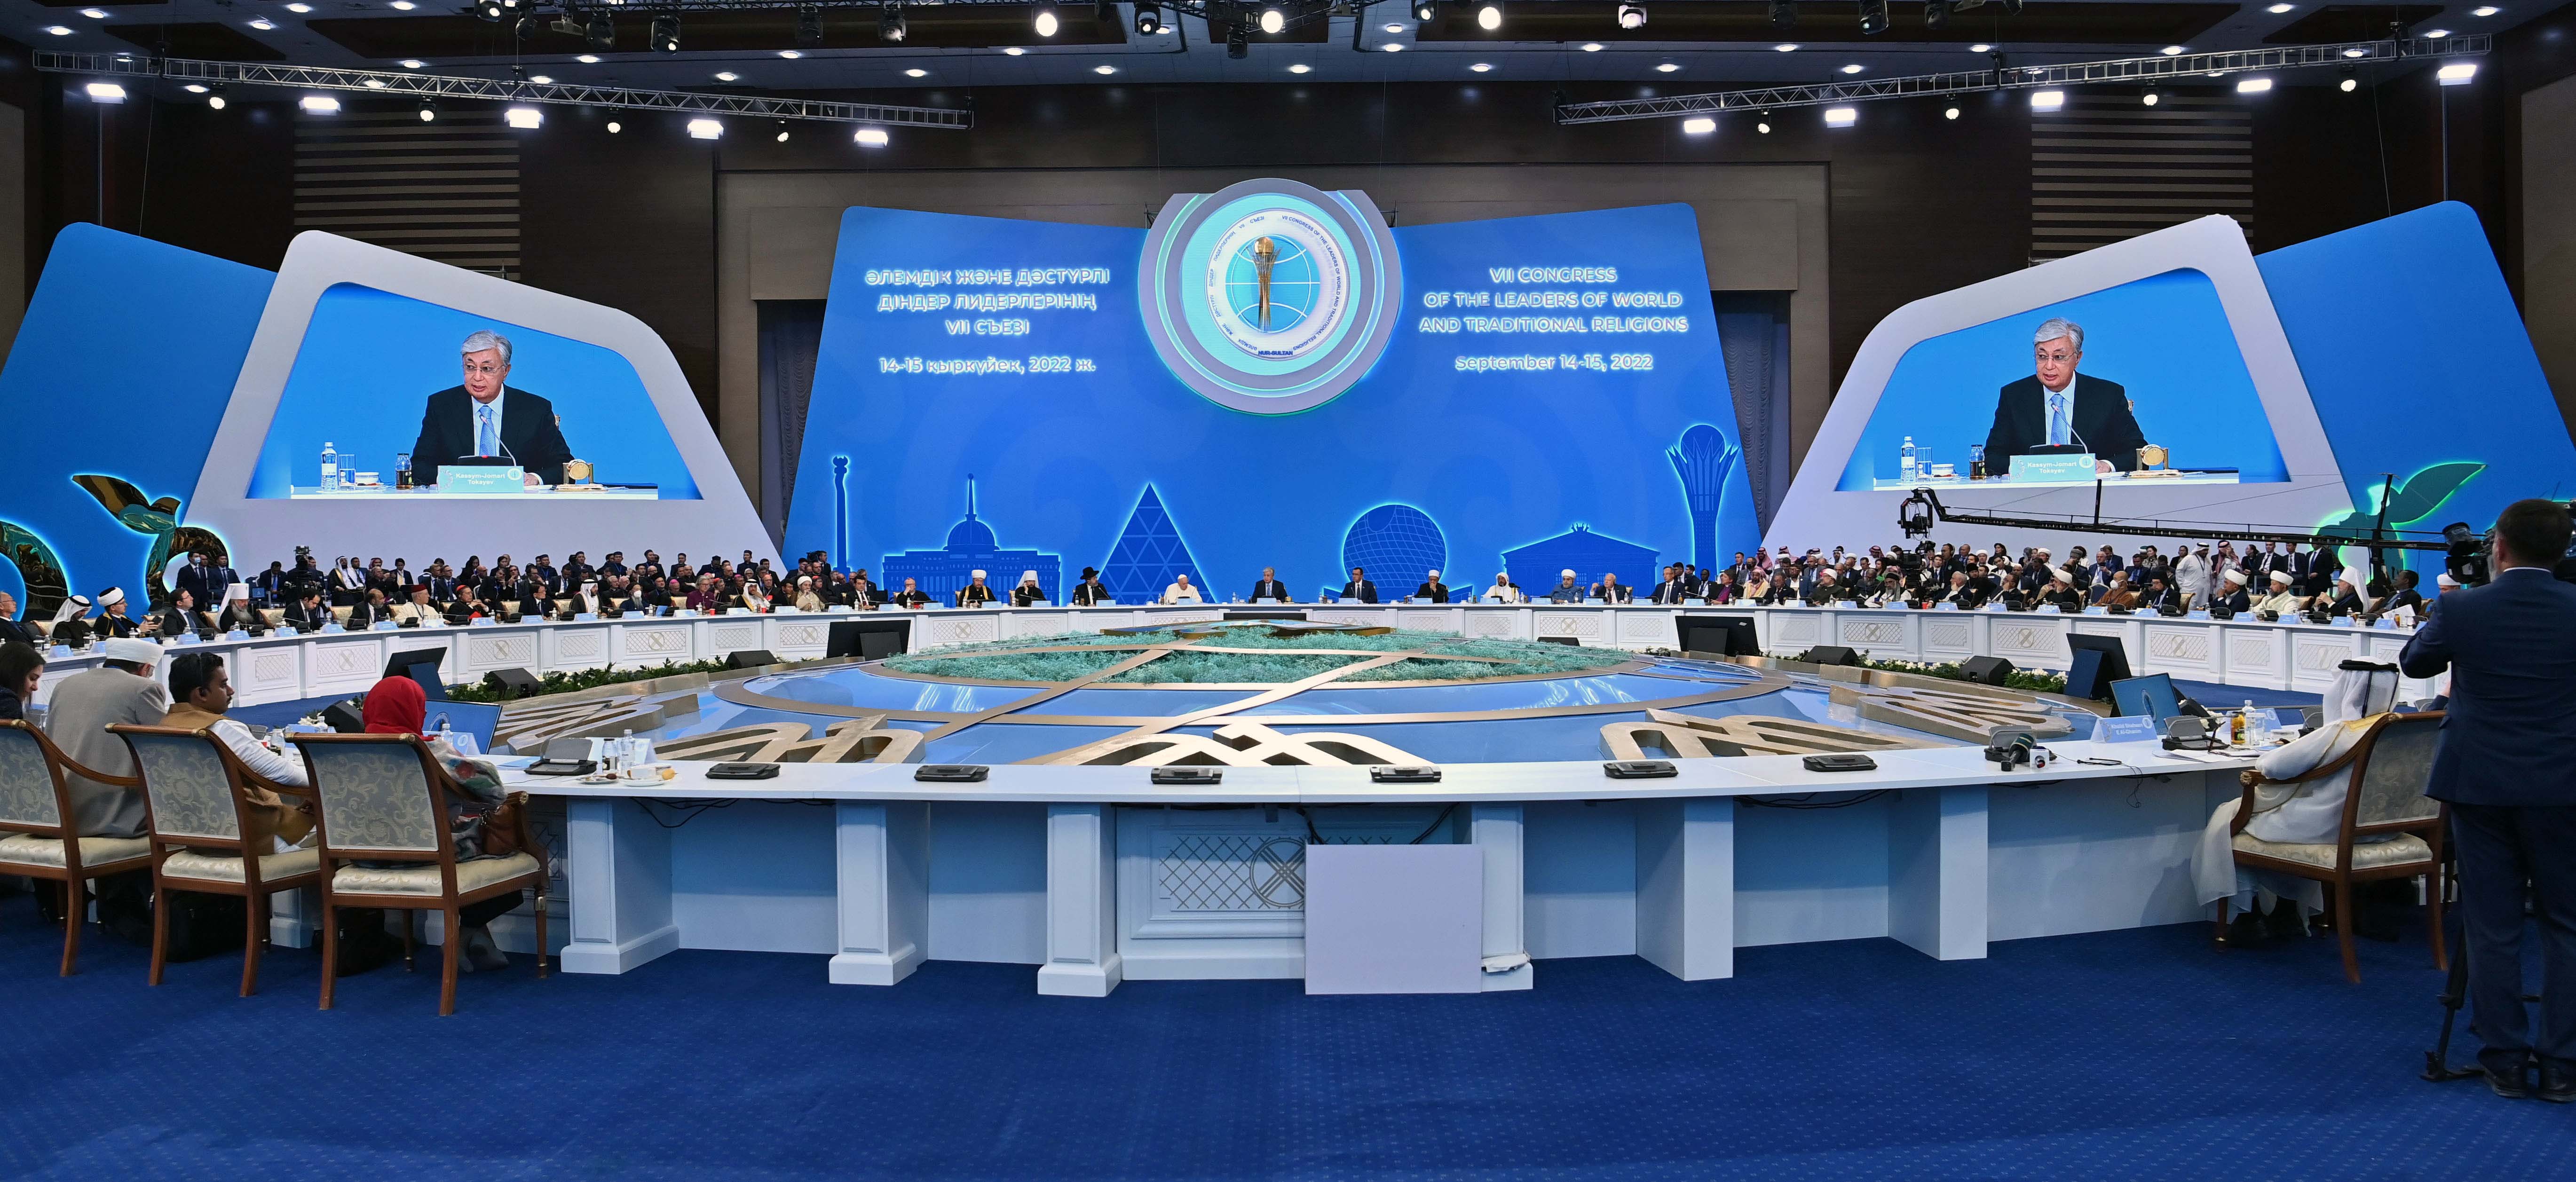 DECLARATION OF VII CONGRESS OF THE LEADERS OF WORLD AND TRADITIONAL RELIGIONS